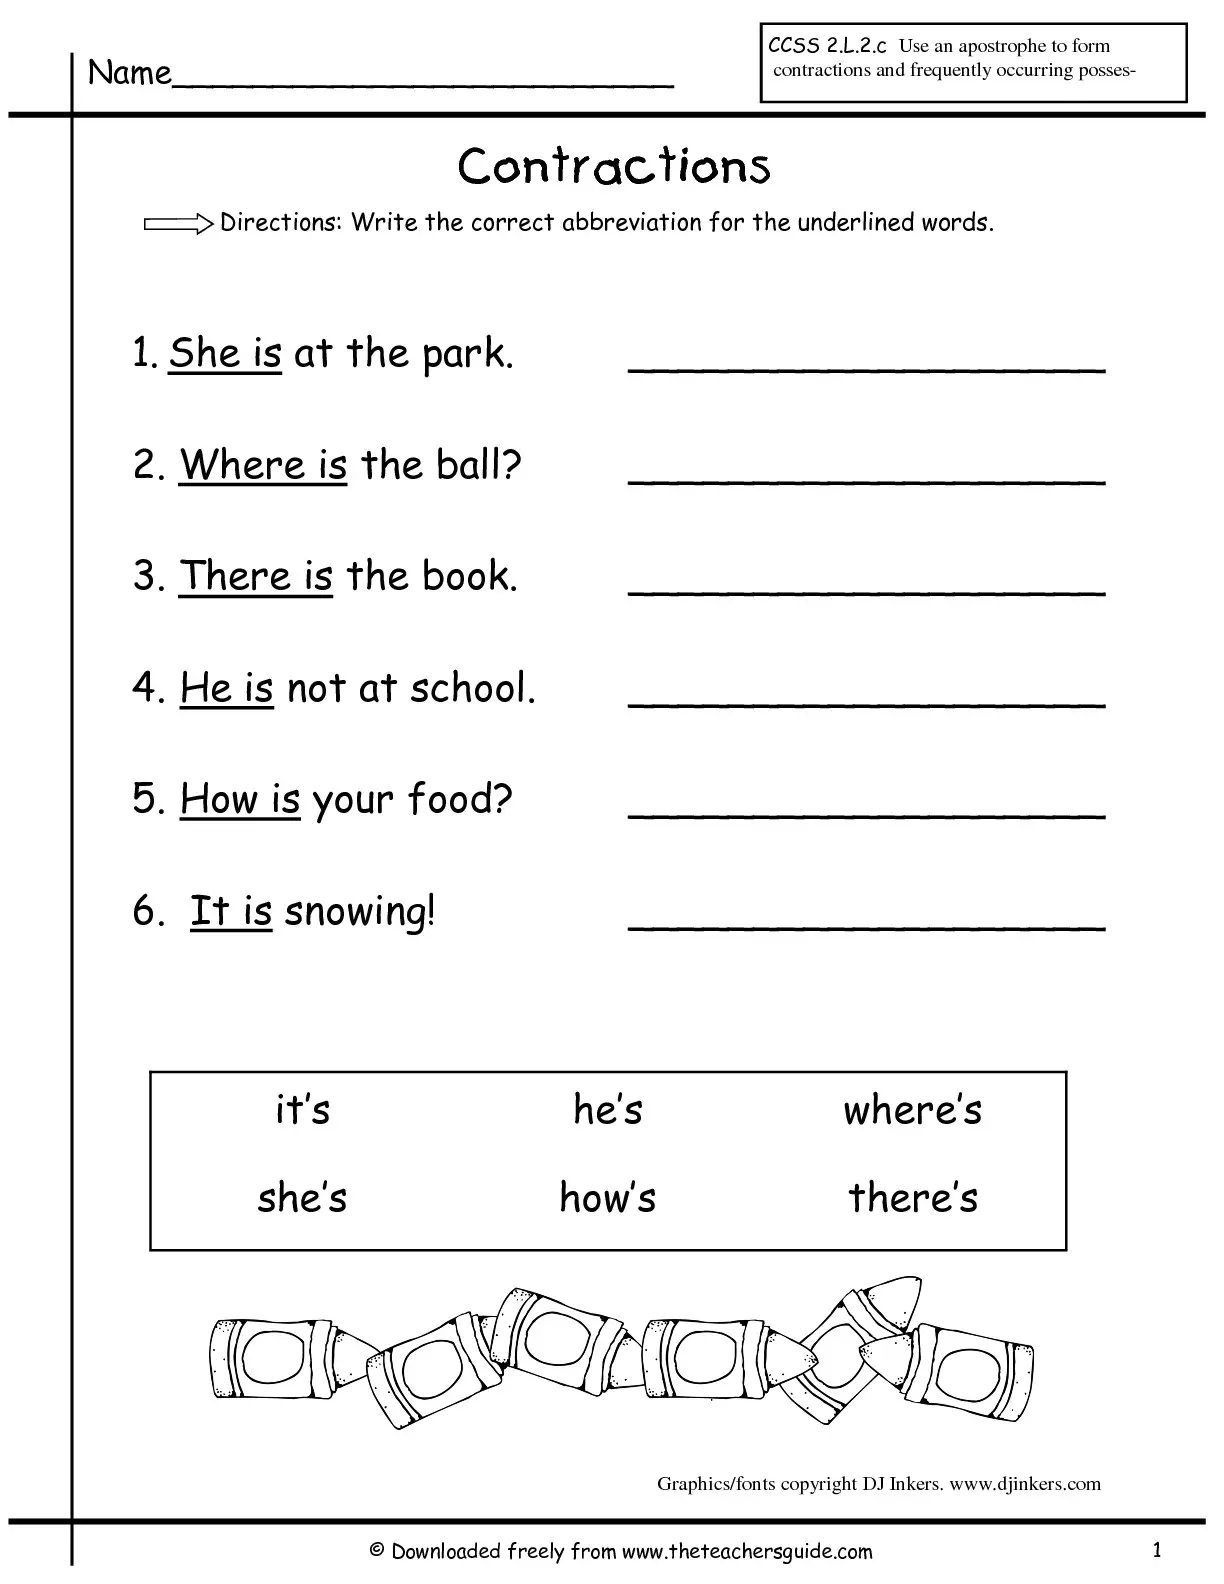 20 Contractions Worksheets for Improving Your Grammar - Kitty Baby With Regard To Contractions Worksheet 3rd Grade